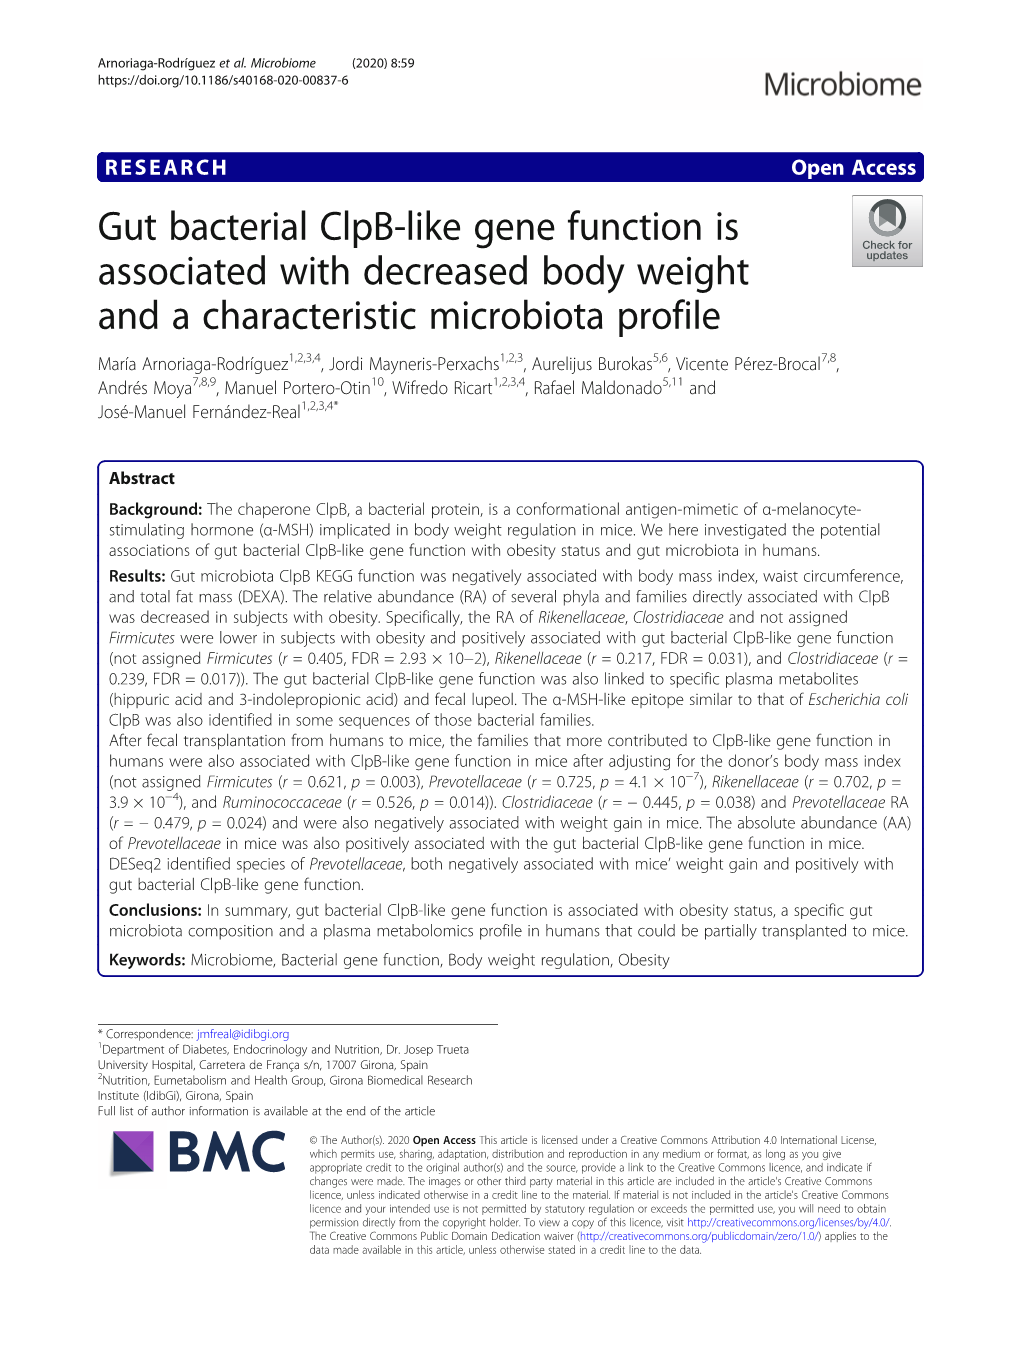 Gut Bacterial Clpb-Like Gene Function Is Associated with Decreased Body Weight and a Characteristic Microbiota Profile